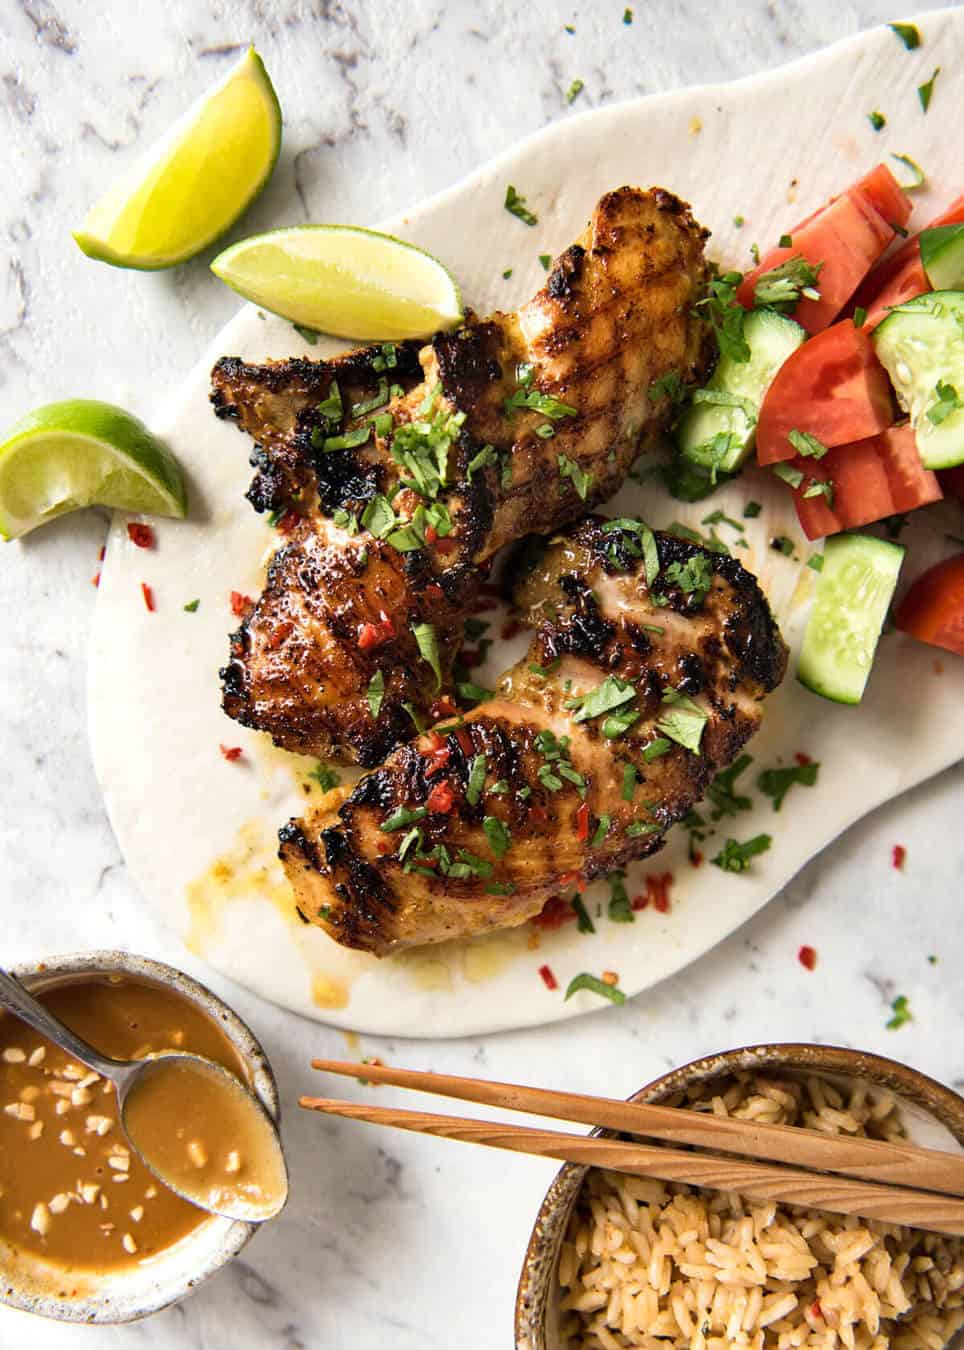 Thai Coconut Chicken - Chicken marinated in a sensational Thai coconut marinade. Great for BBQ, stove or roasting. www.recipetineats.com